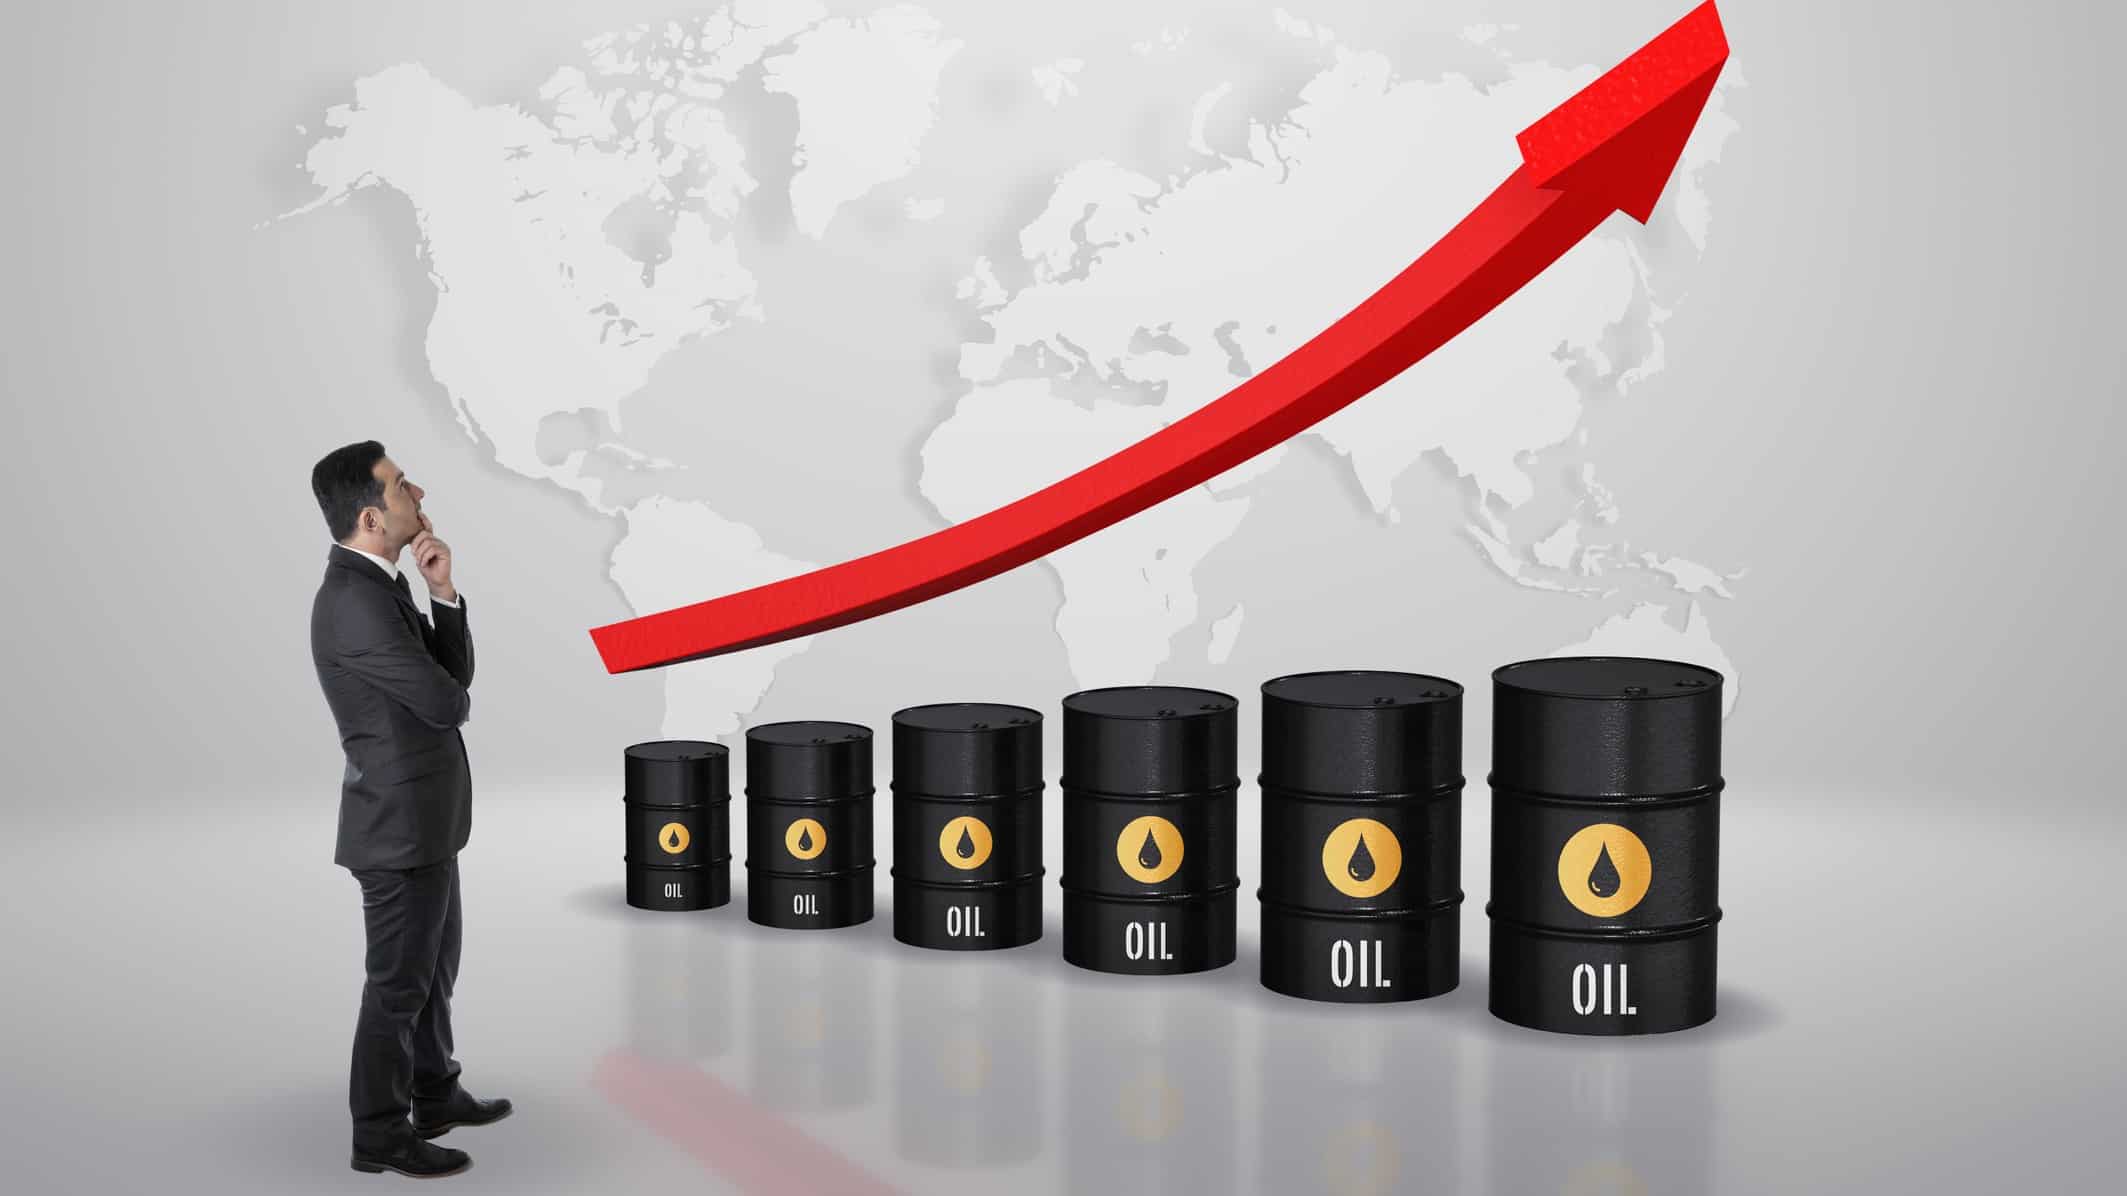 a man in a business suit looks at a map of the world above a line up of oil barrels with a red arrow heading upwards above them, indicting rising oil prices.